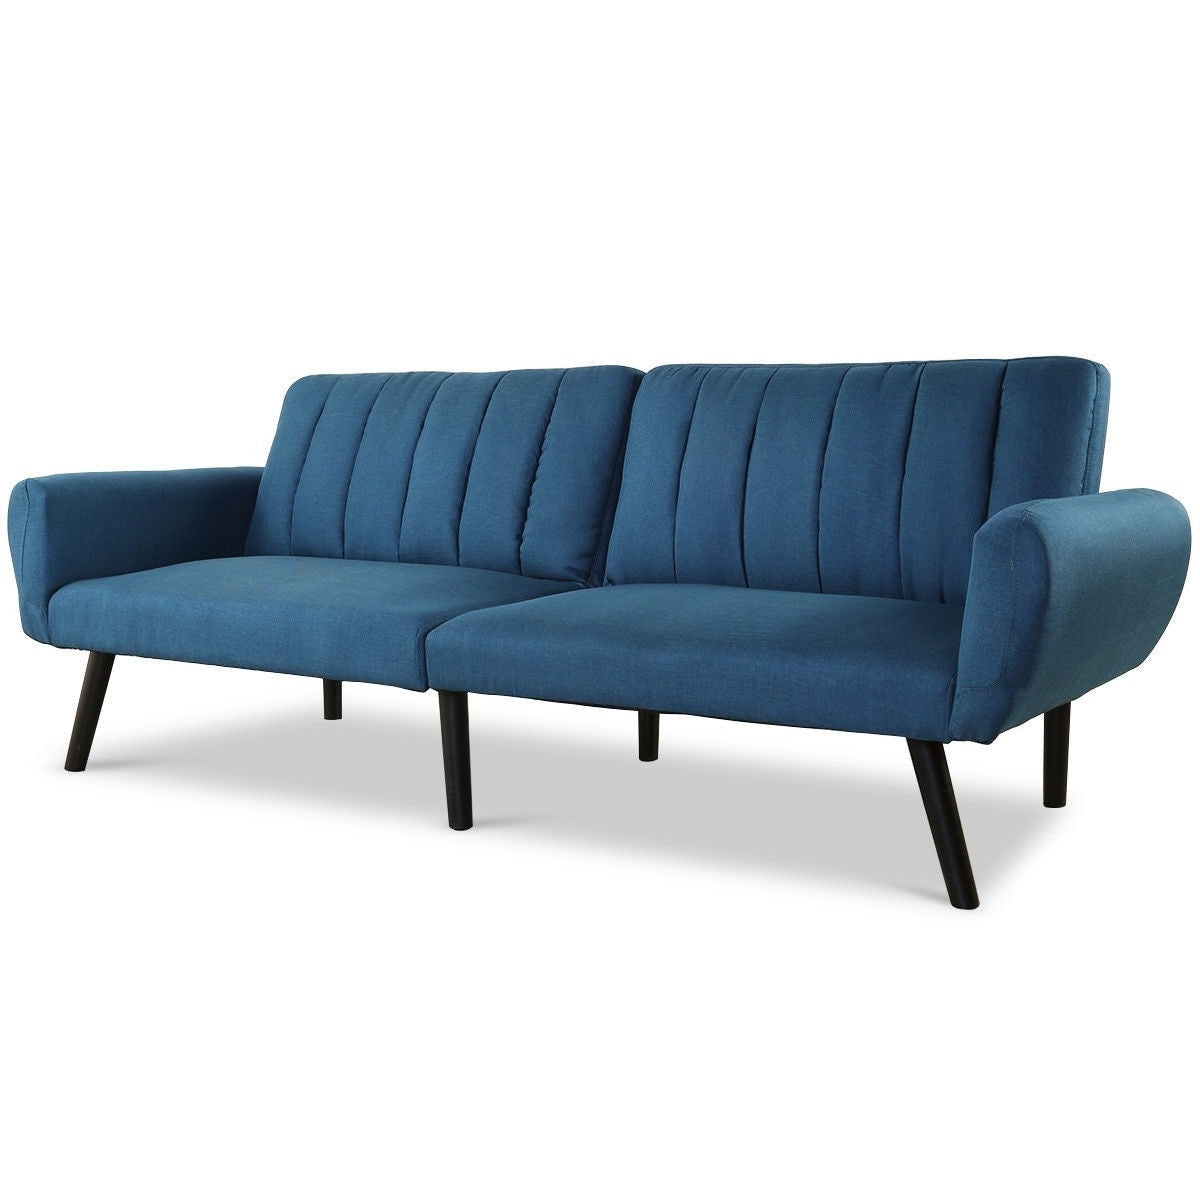 Living Room > Sofas - Modern Mid-Century Navy Blue Linen Futon Sofa Bed Couch